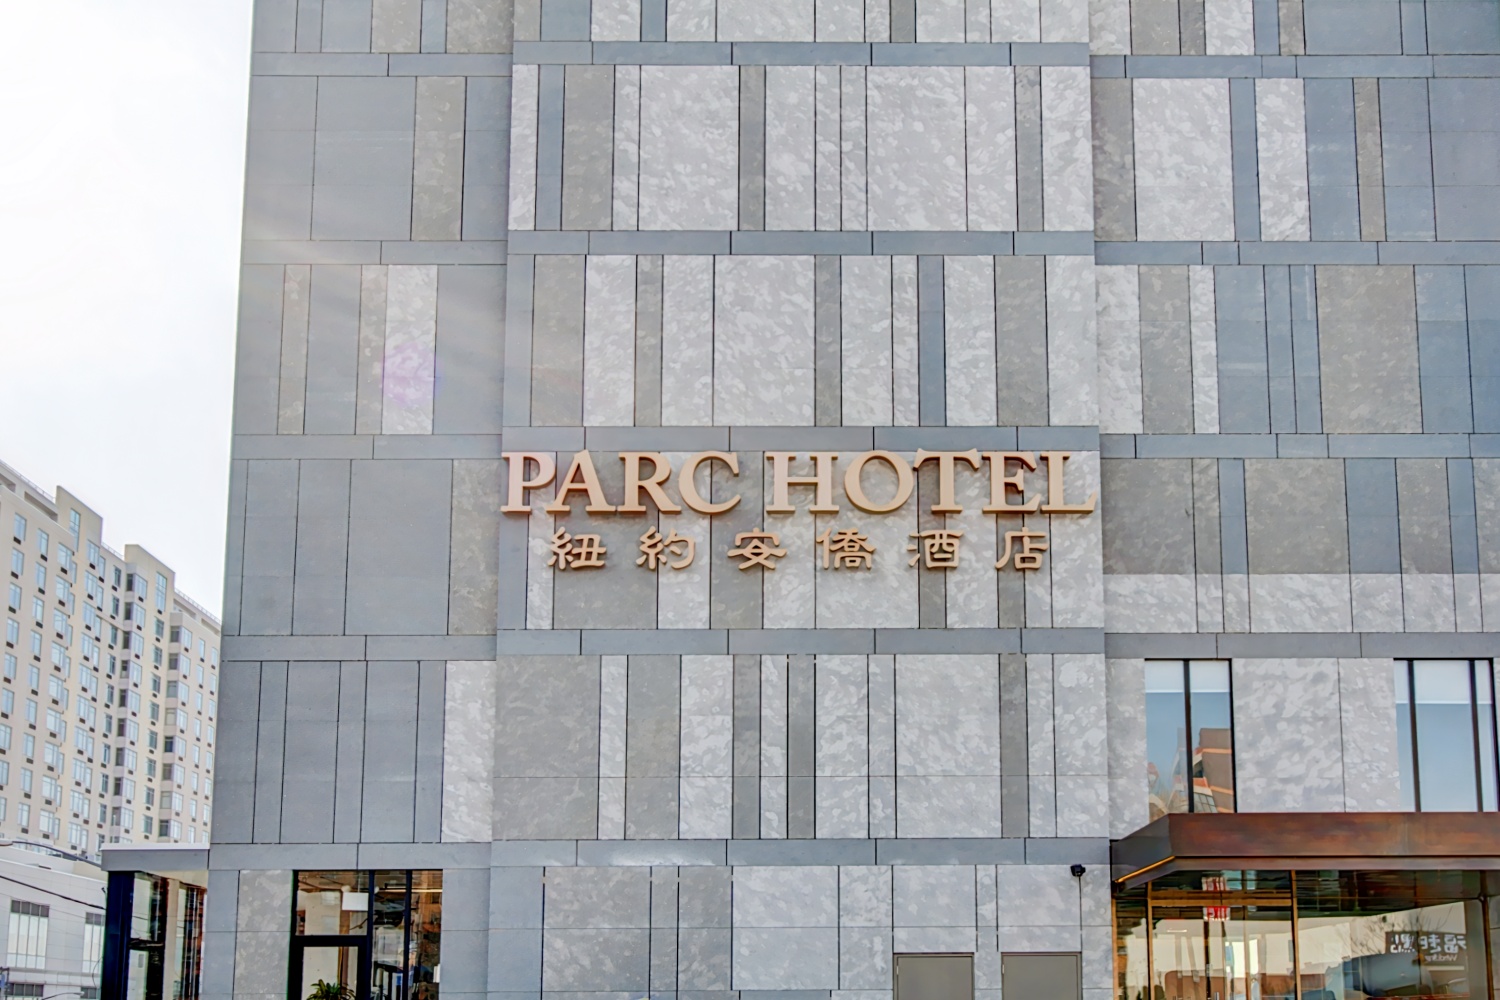 The Parc Hotel